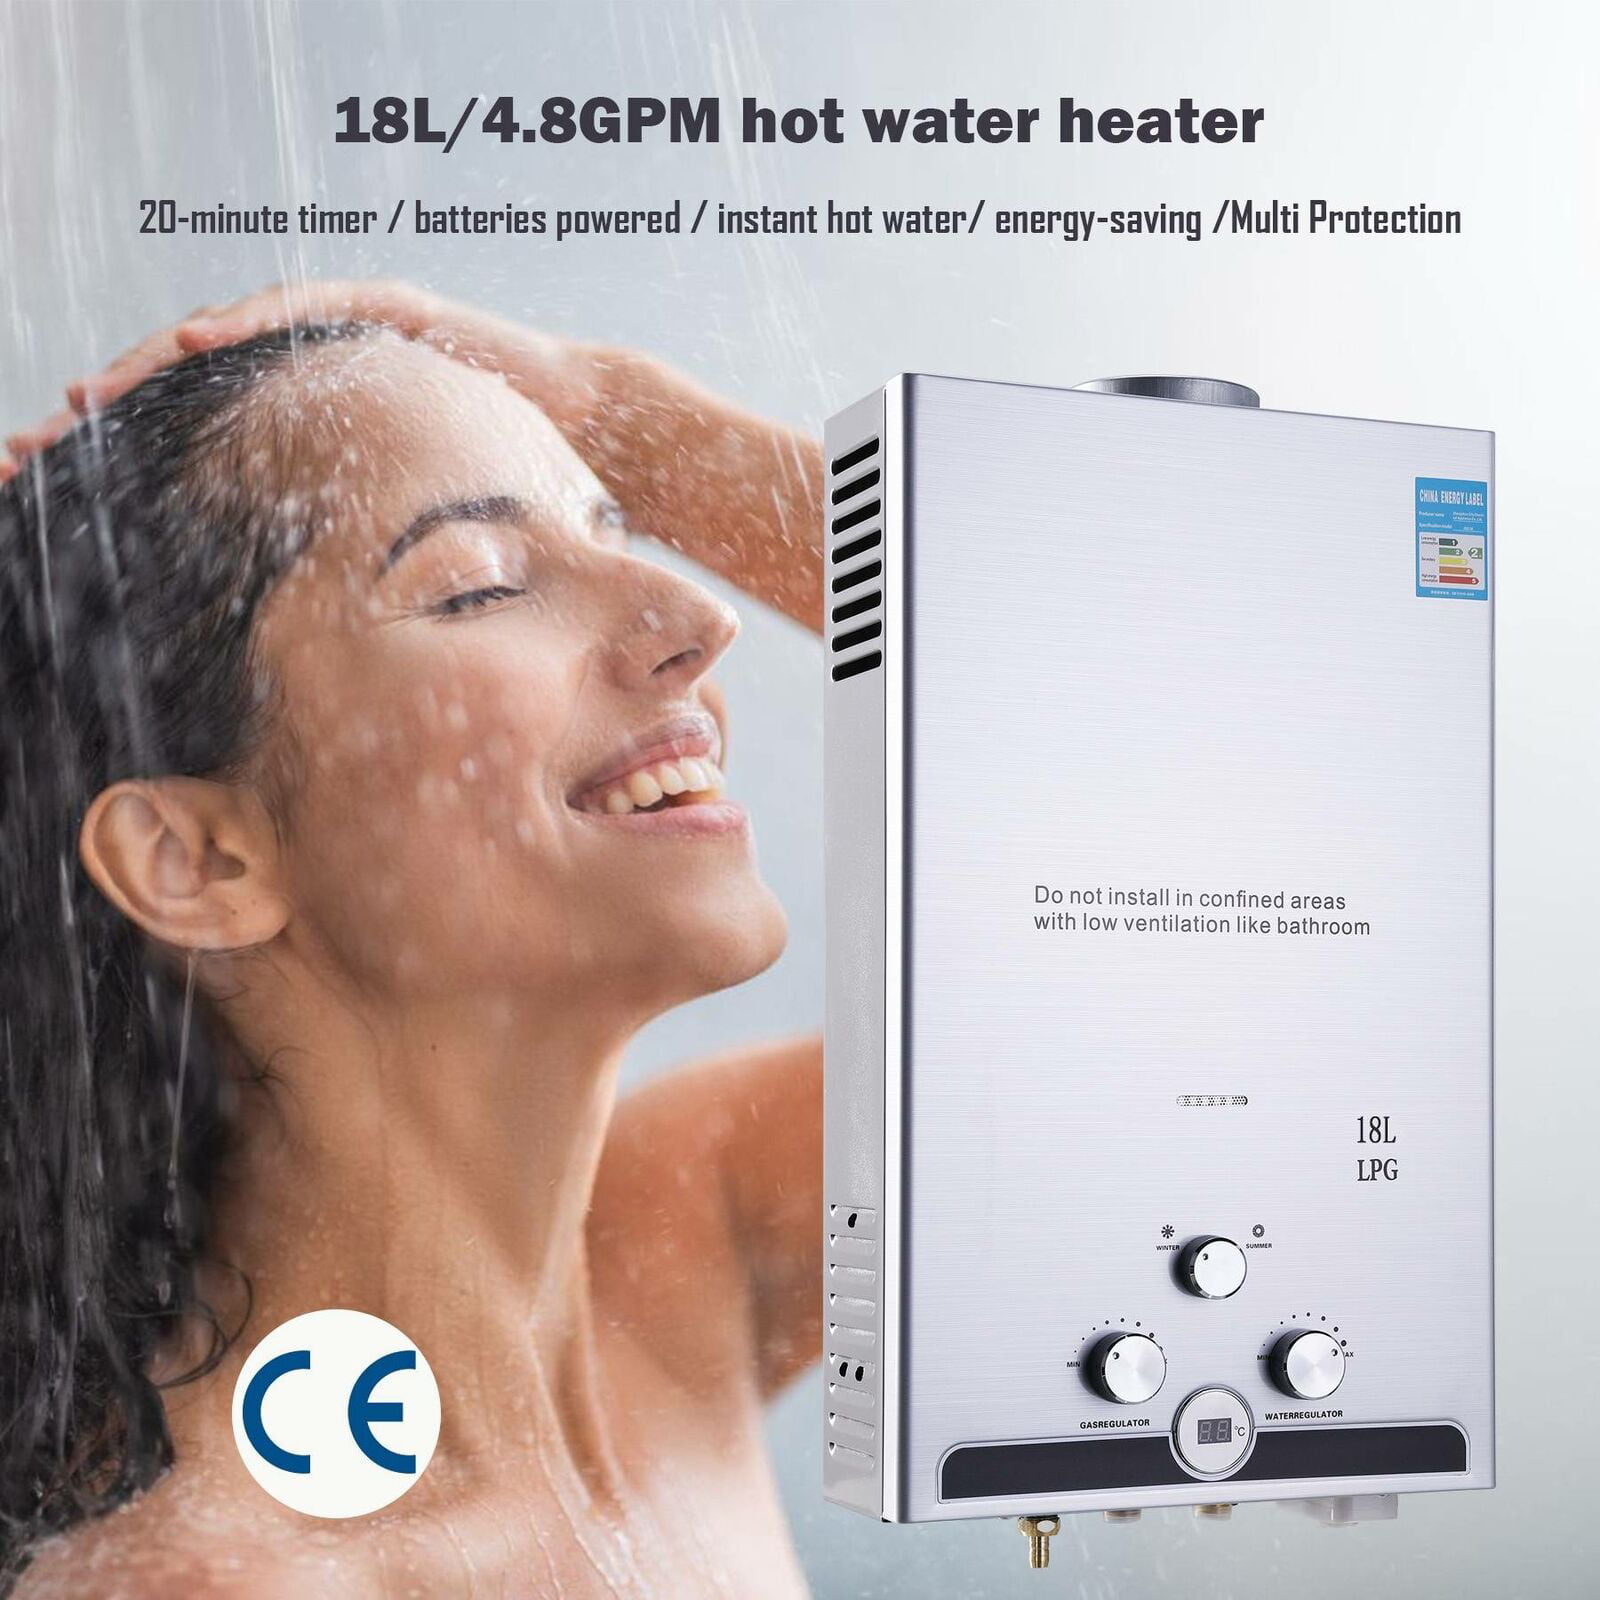 Details about  / 18L Hot Water Heater Natural Gas 5GPM On-Demand Tankless Instant Boiler